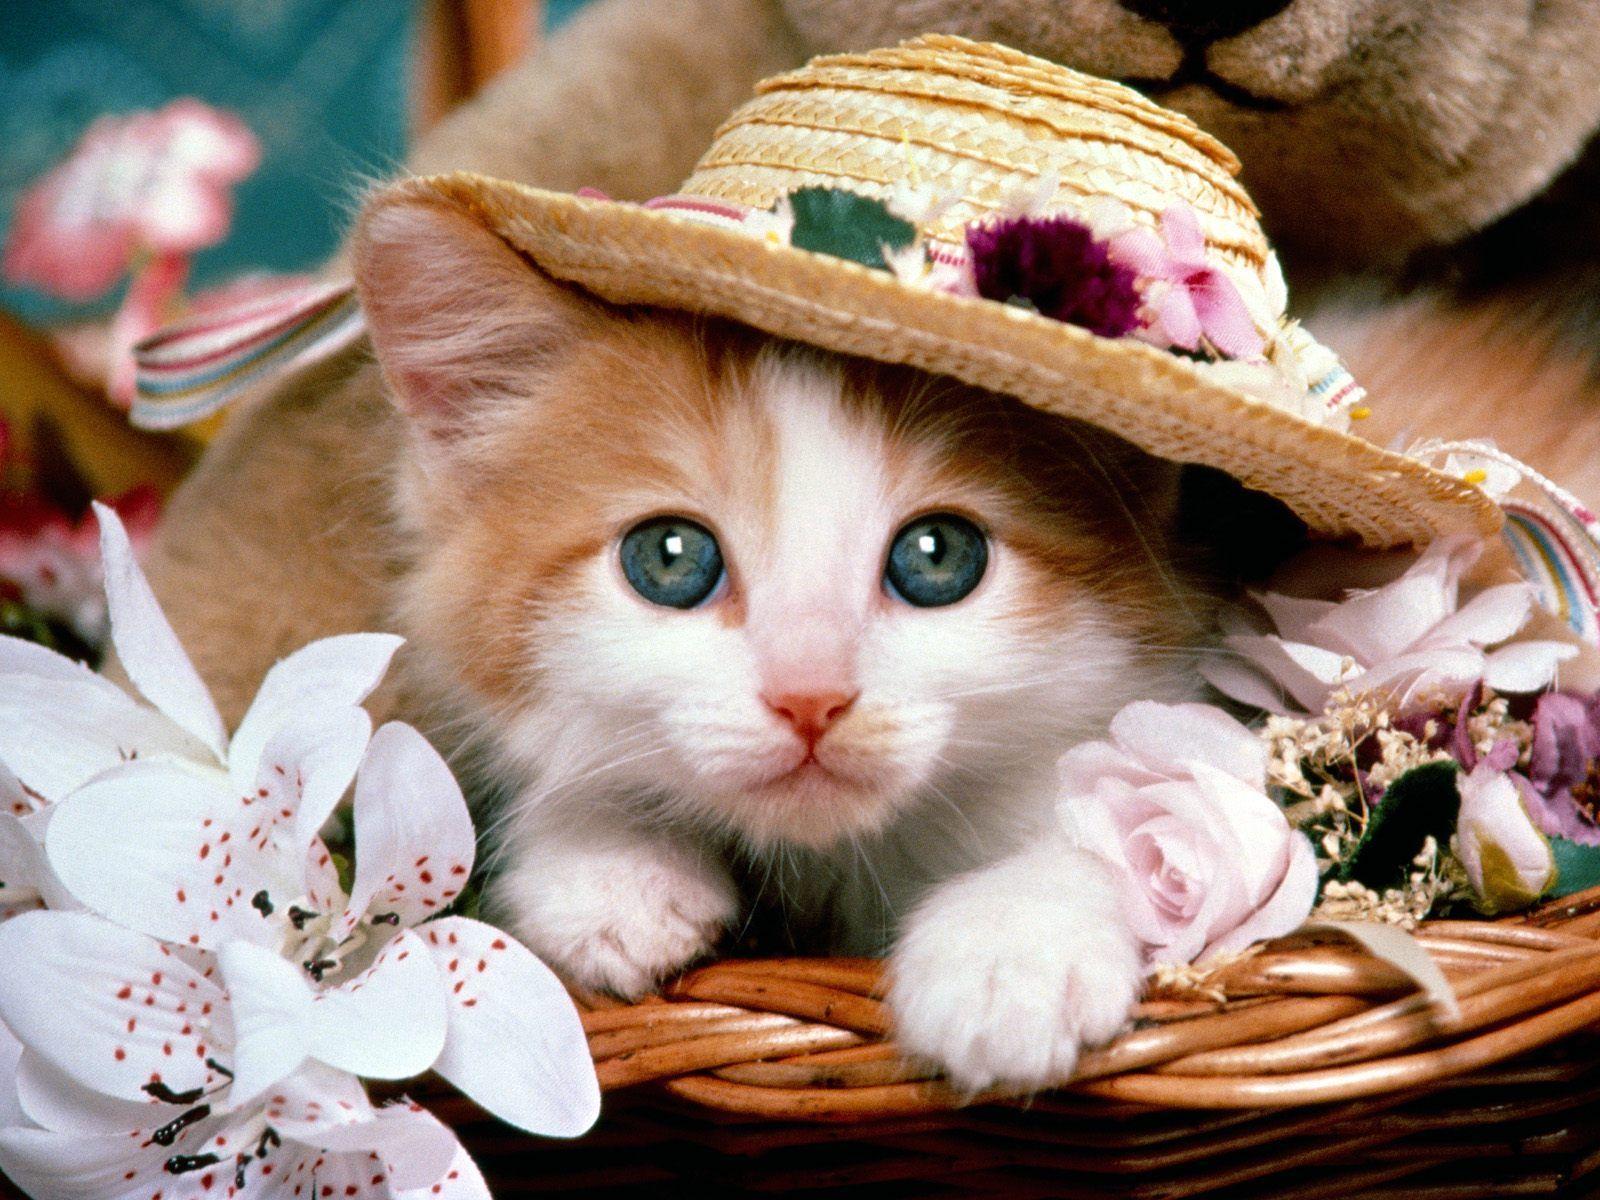 cute cat ready to go outside. Cute cat wallpaper, Cute cats and kittens, Funny cat wallpaper